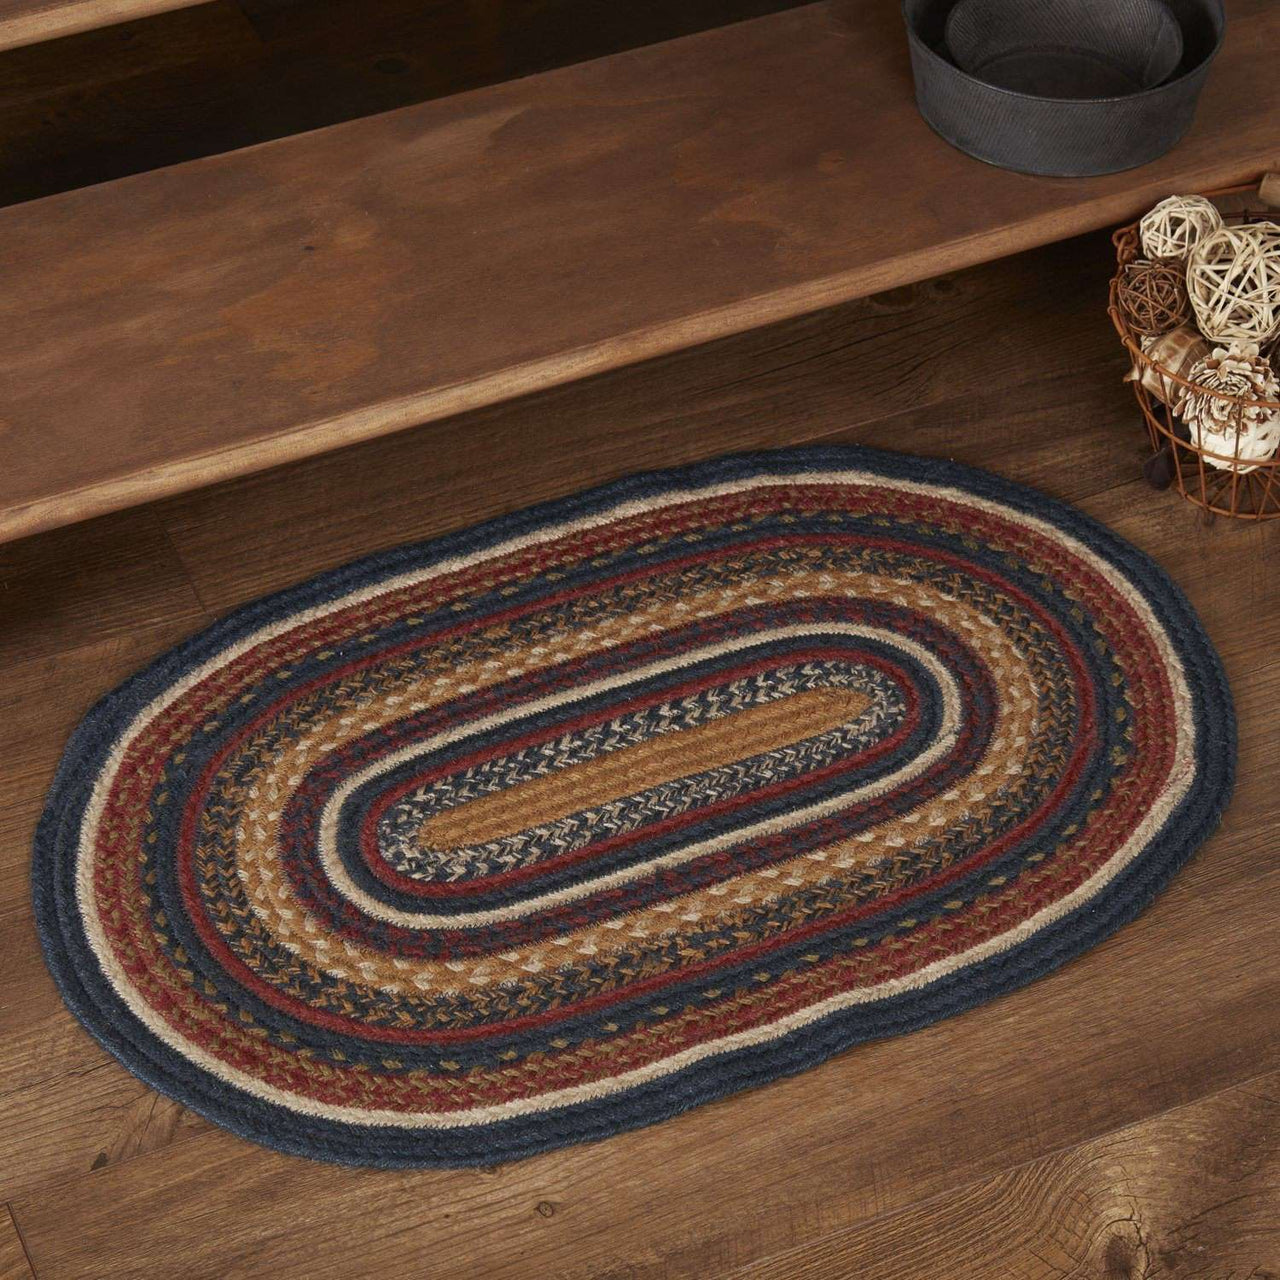 Stratton Jute Braided Rugs Oval VHC Brands Online - The Fox Decor